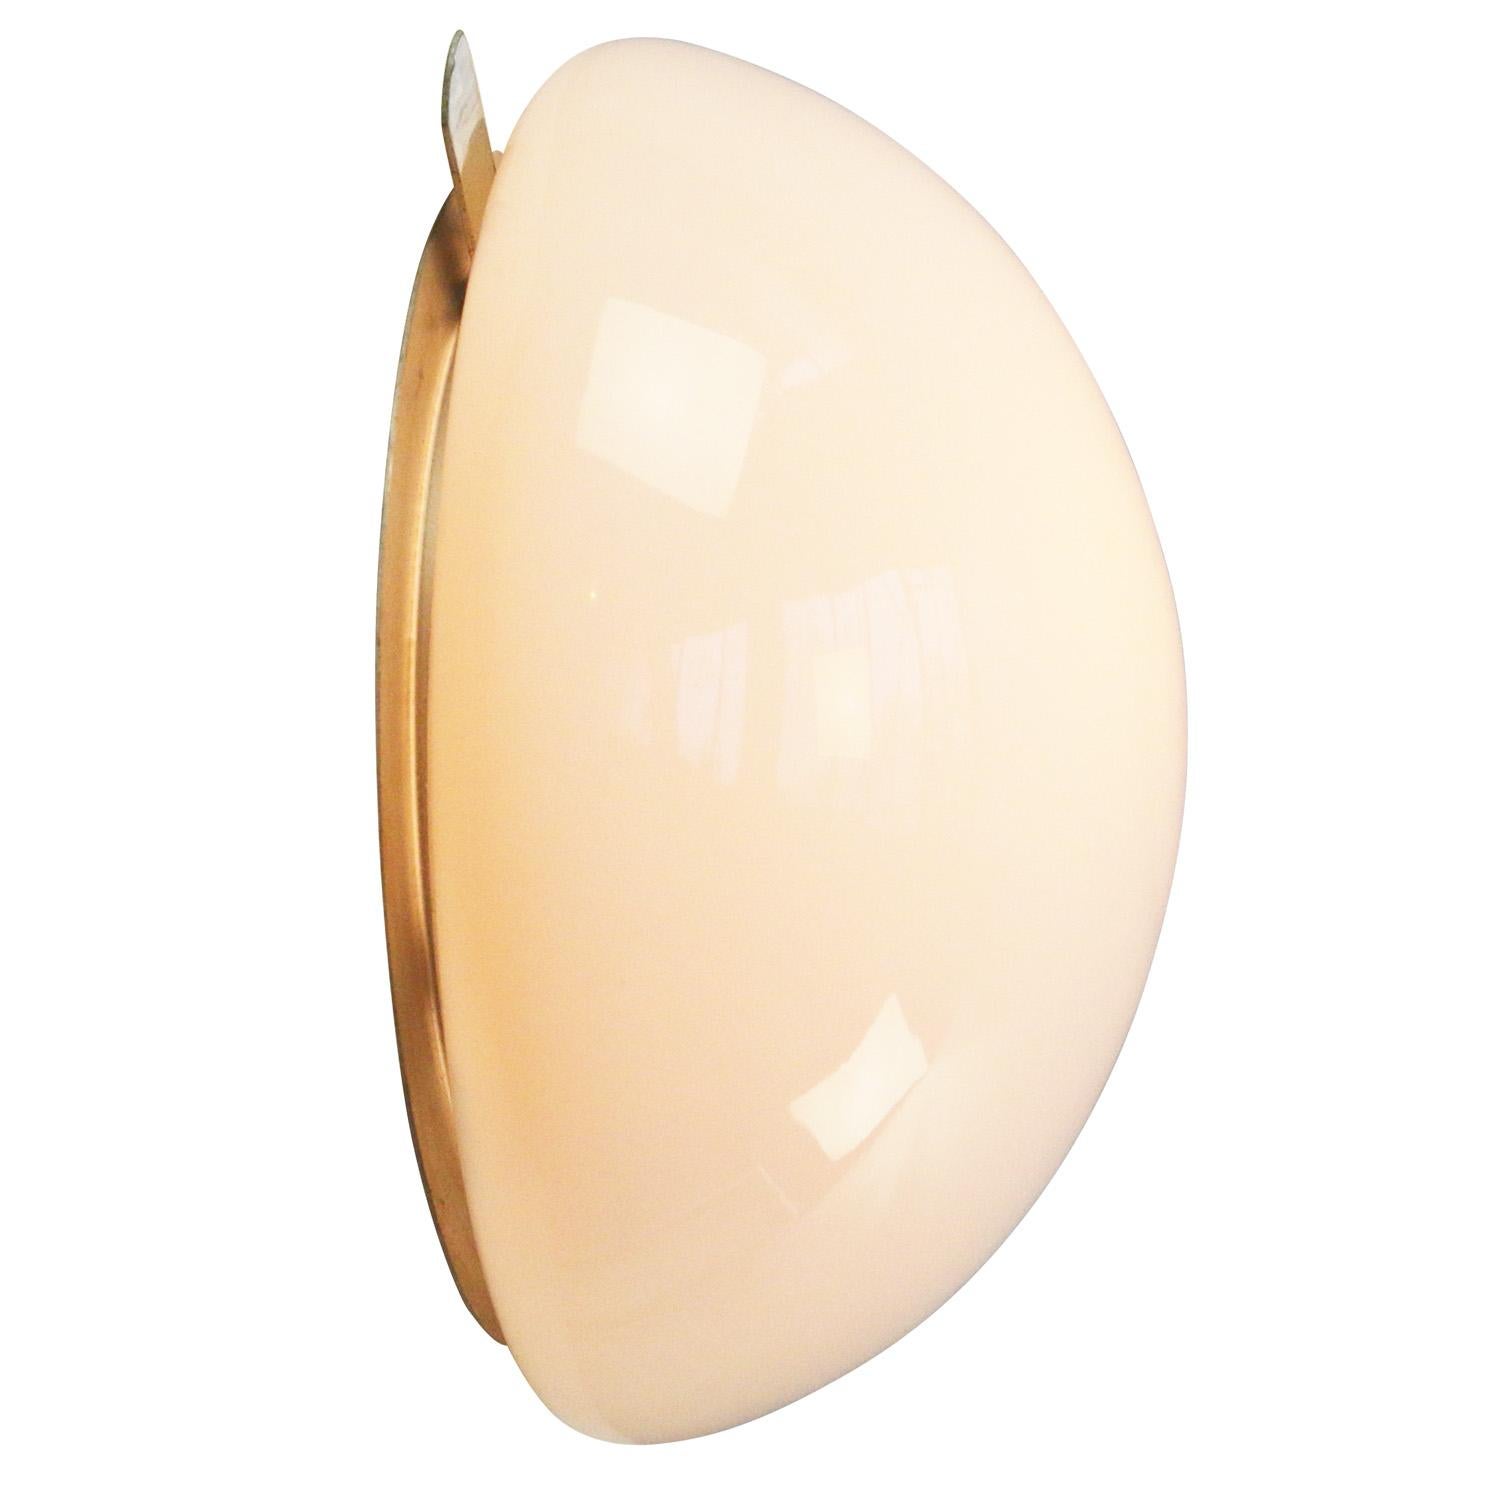 Belgian opaline industrial ceiling lamp.

Aluminum base with white opaline glass.

Weight: 0.90 kg / 2 lb.

Priced per individual item. All lamps have been made suitable by international standards for incandescent light bulbs, energy-efficient